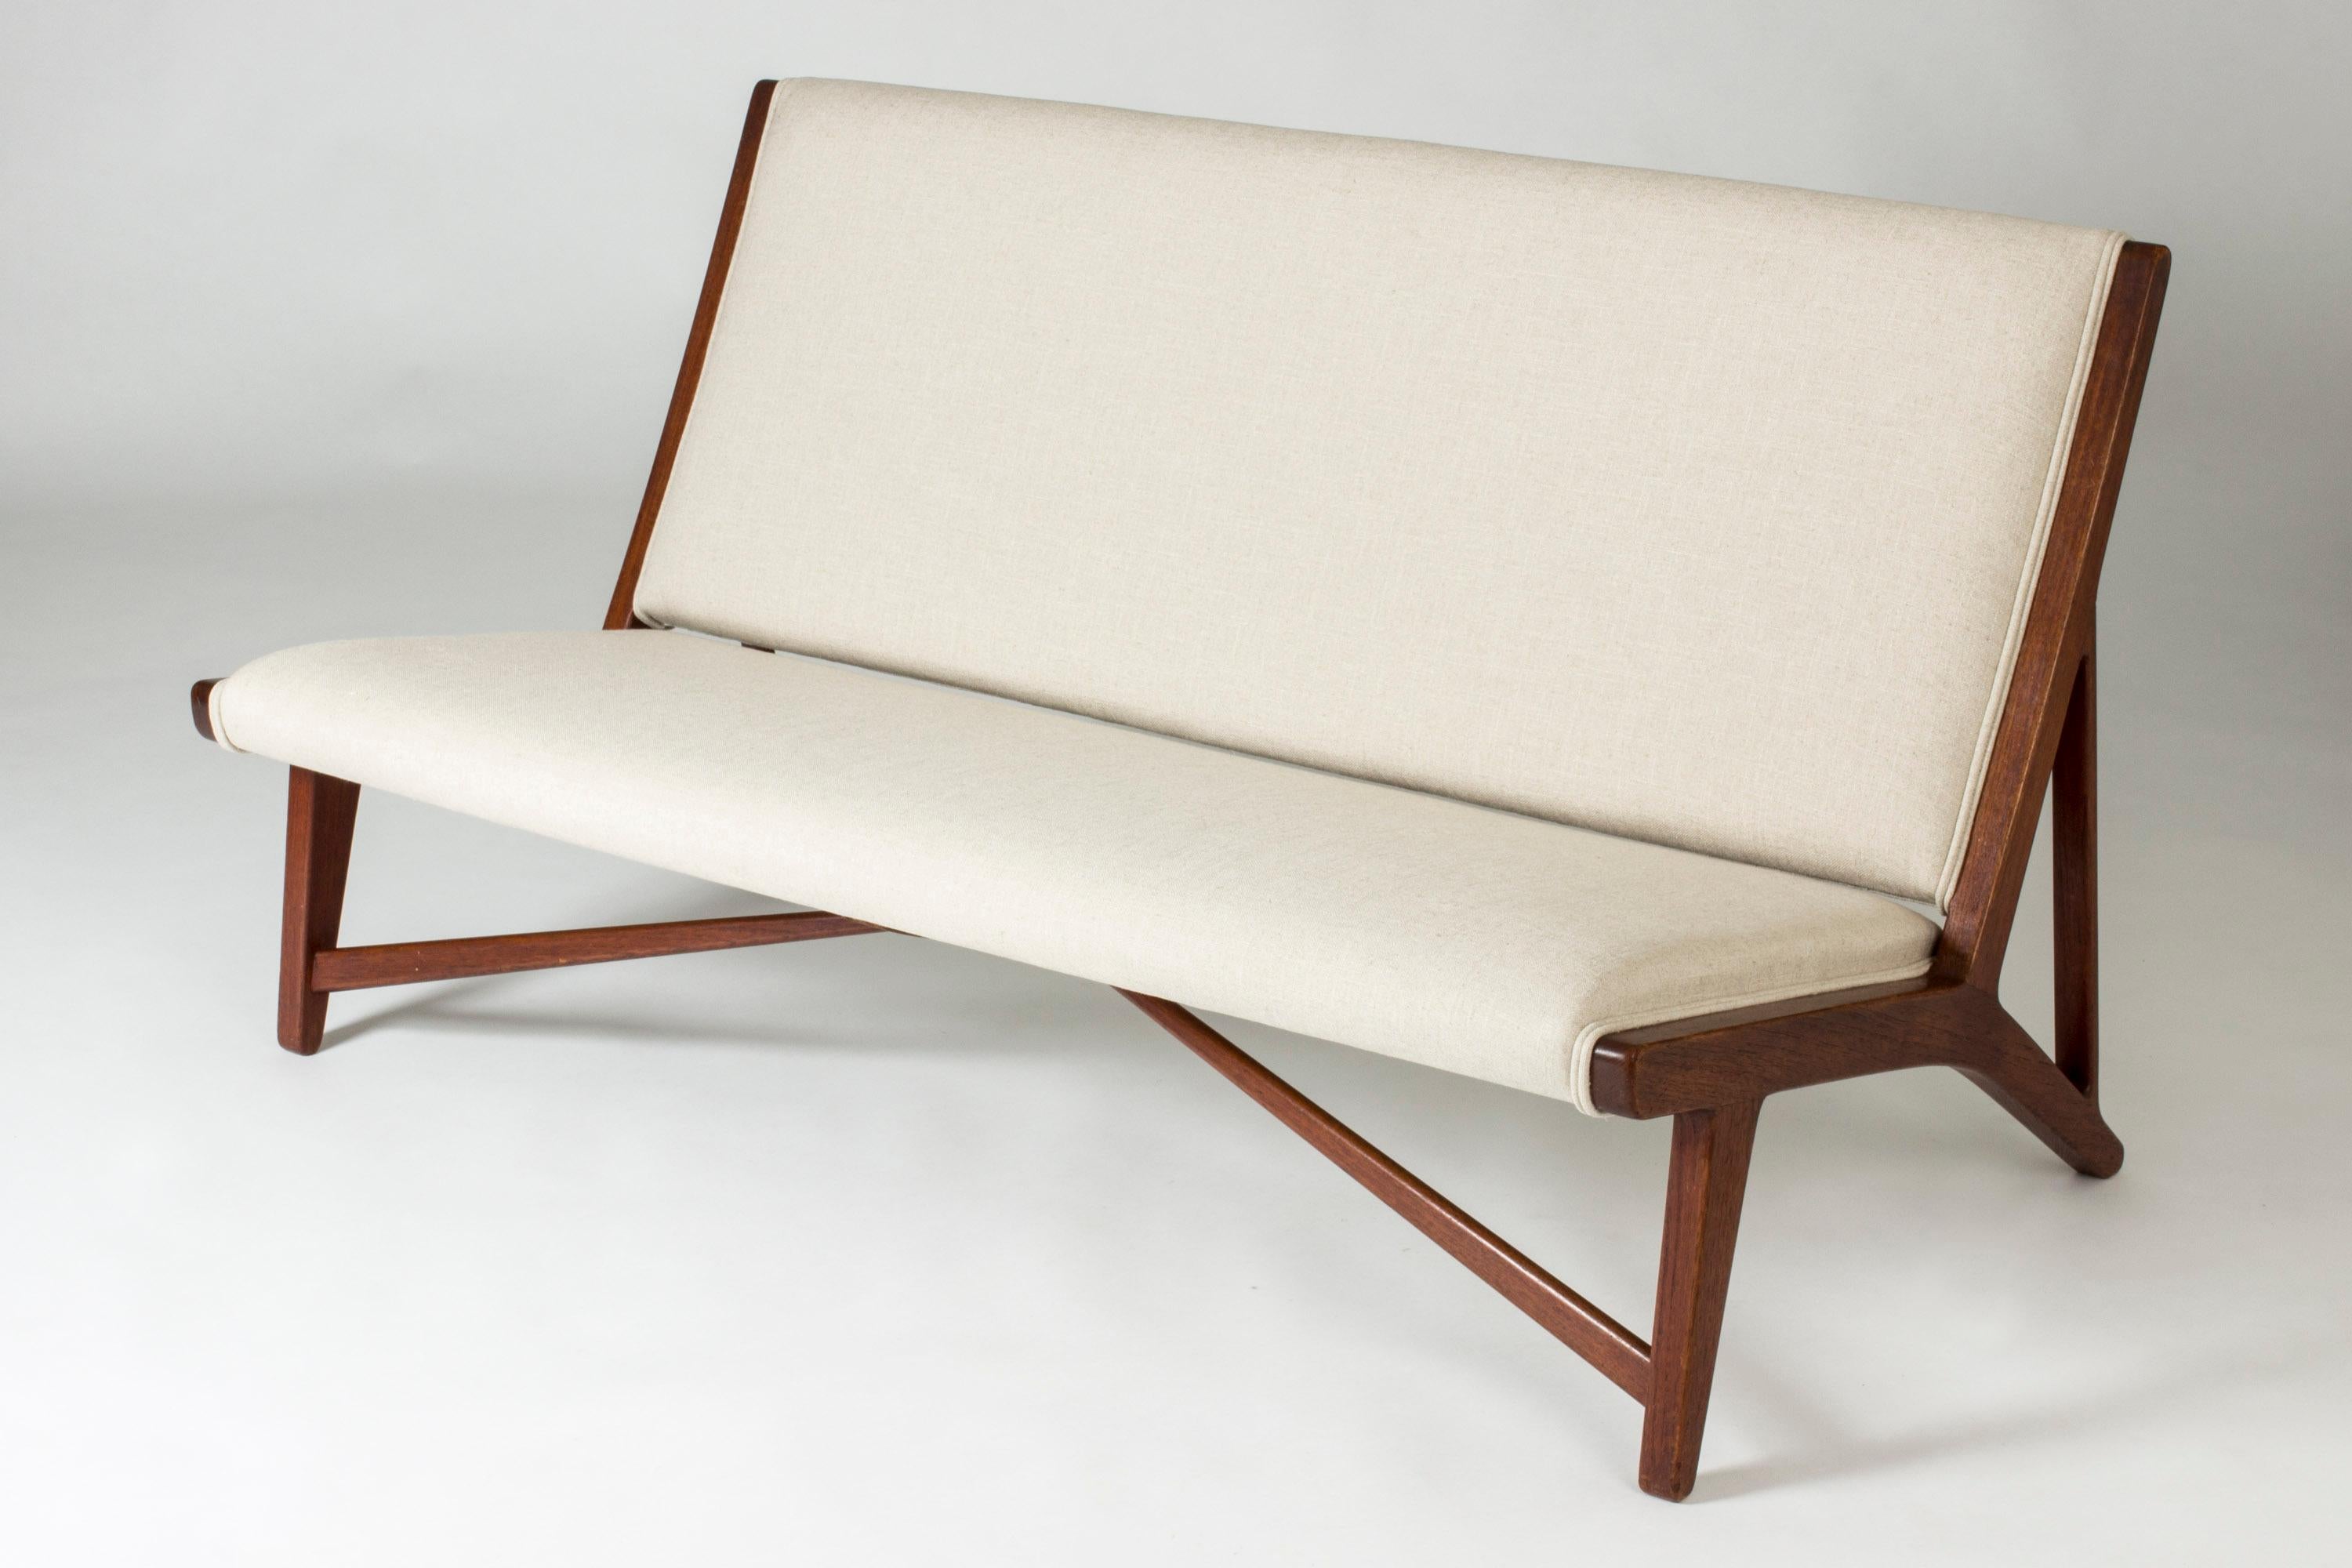 Amazing sofa by Hans J. Wegner, model “JH 555”. Made from teak with linen upholstery. Clean lines with a striking silhouette and decorative wooden elements. Casually elegant, laid-back design.